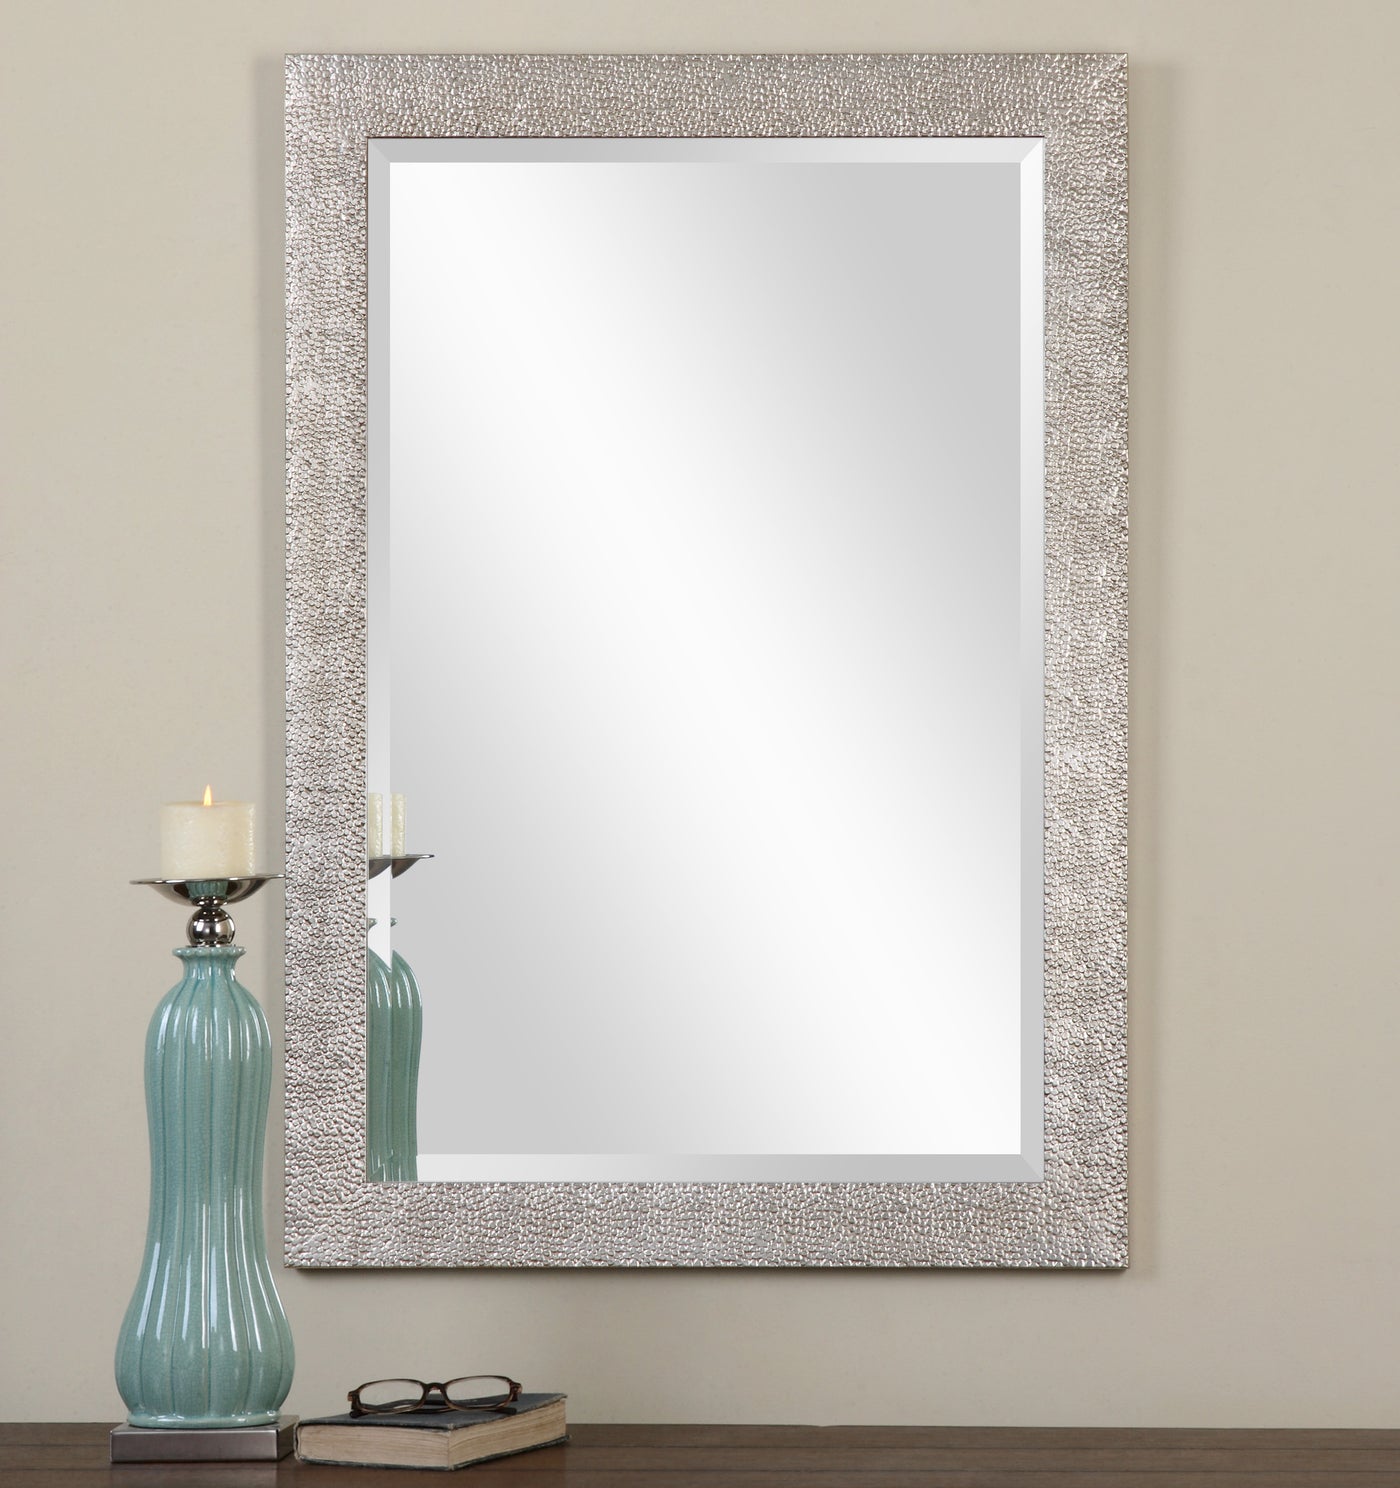 Frame Has A Textured Profile Finished In A Lightly Antiqued Silver. Mirror Features A Generous 1 1/4" Bevel And May Be Hun...